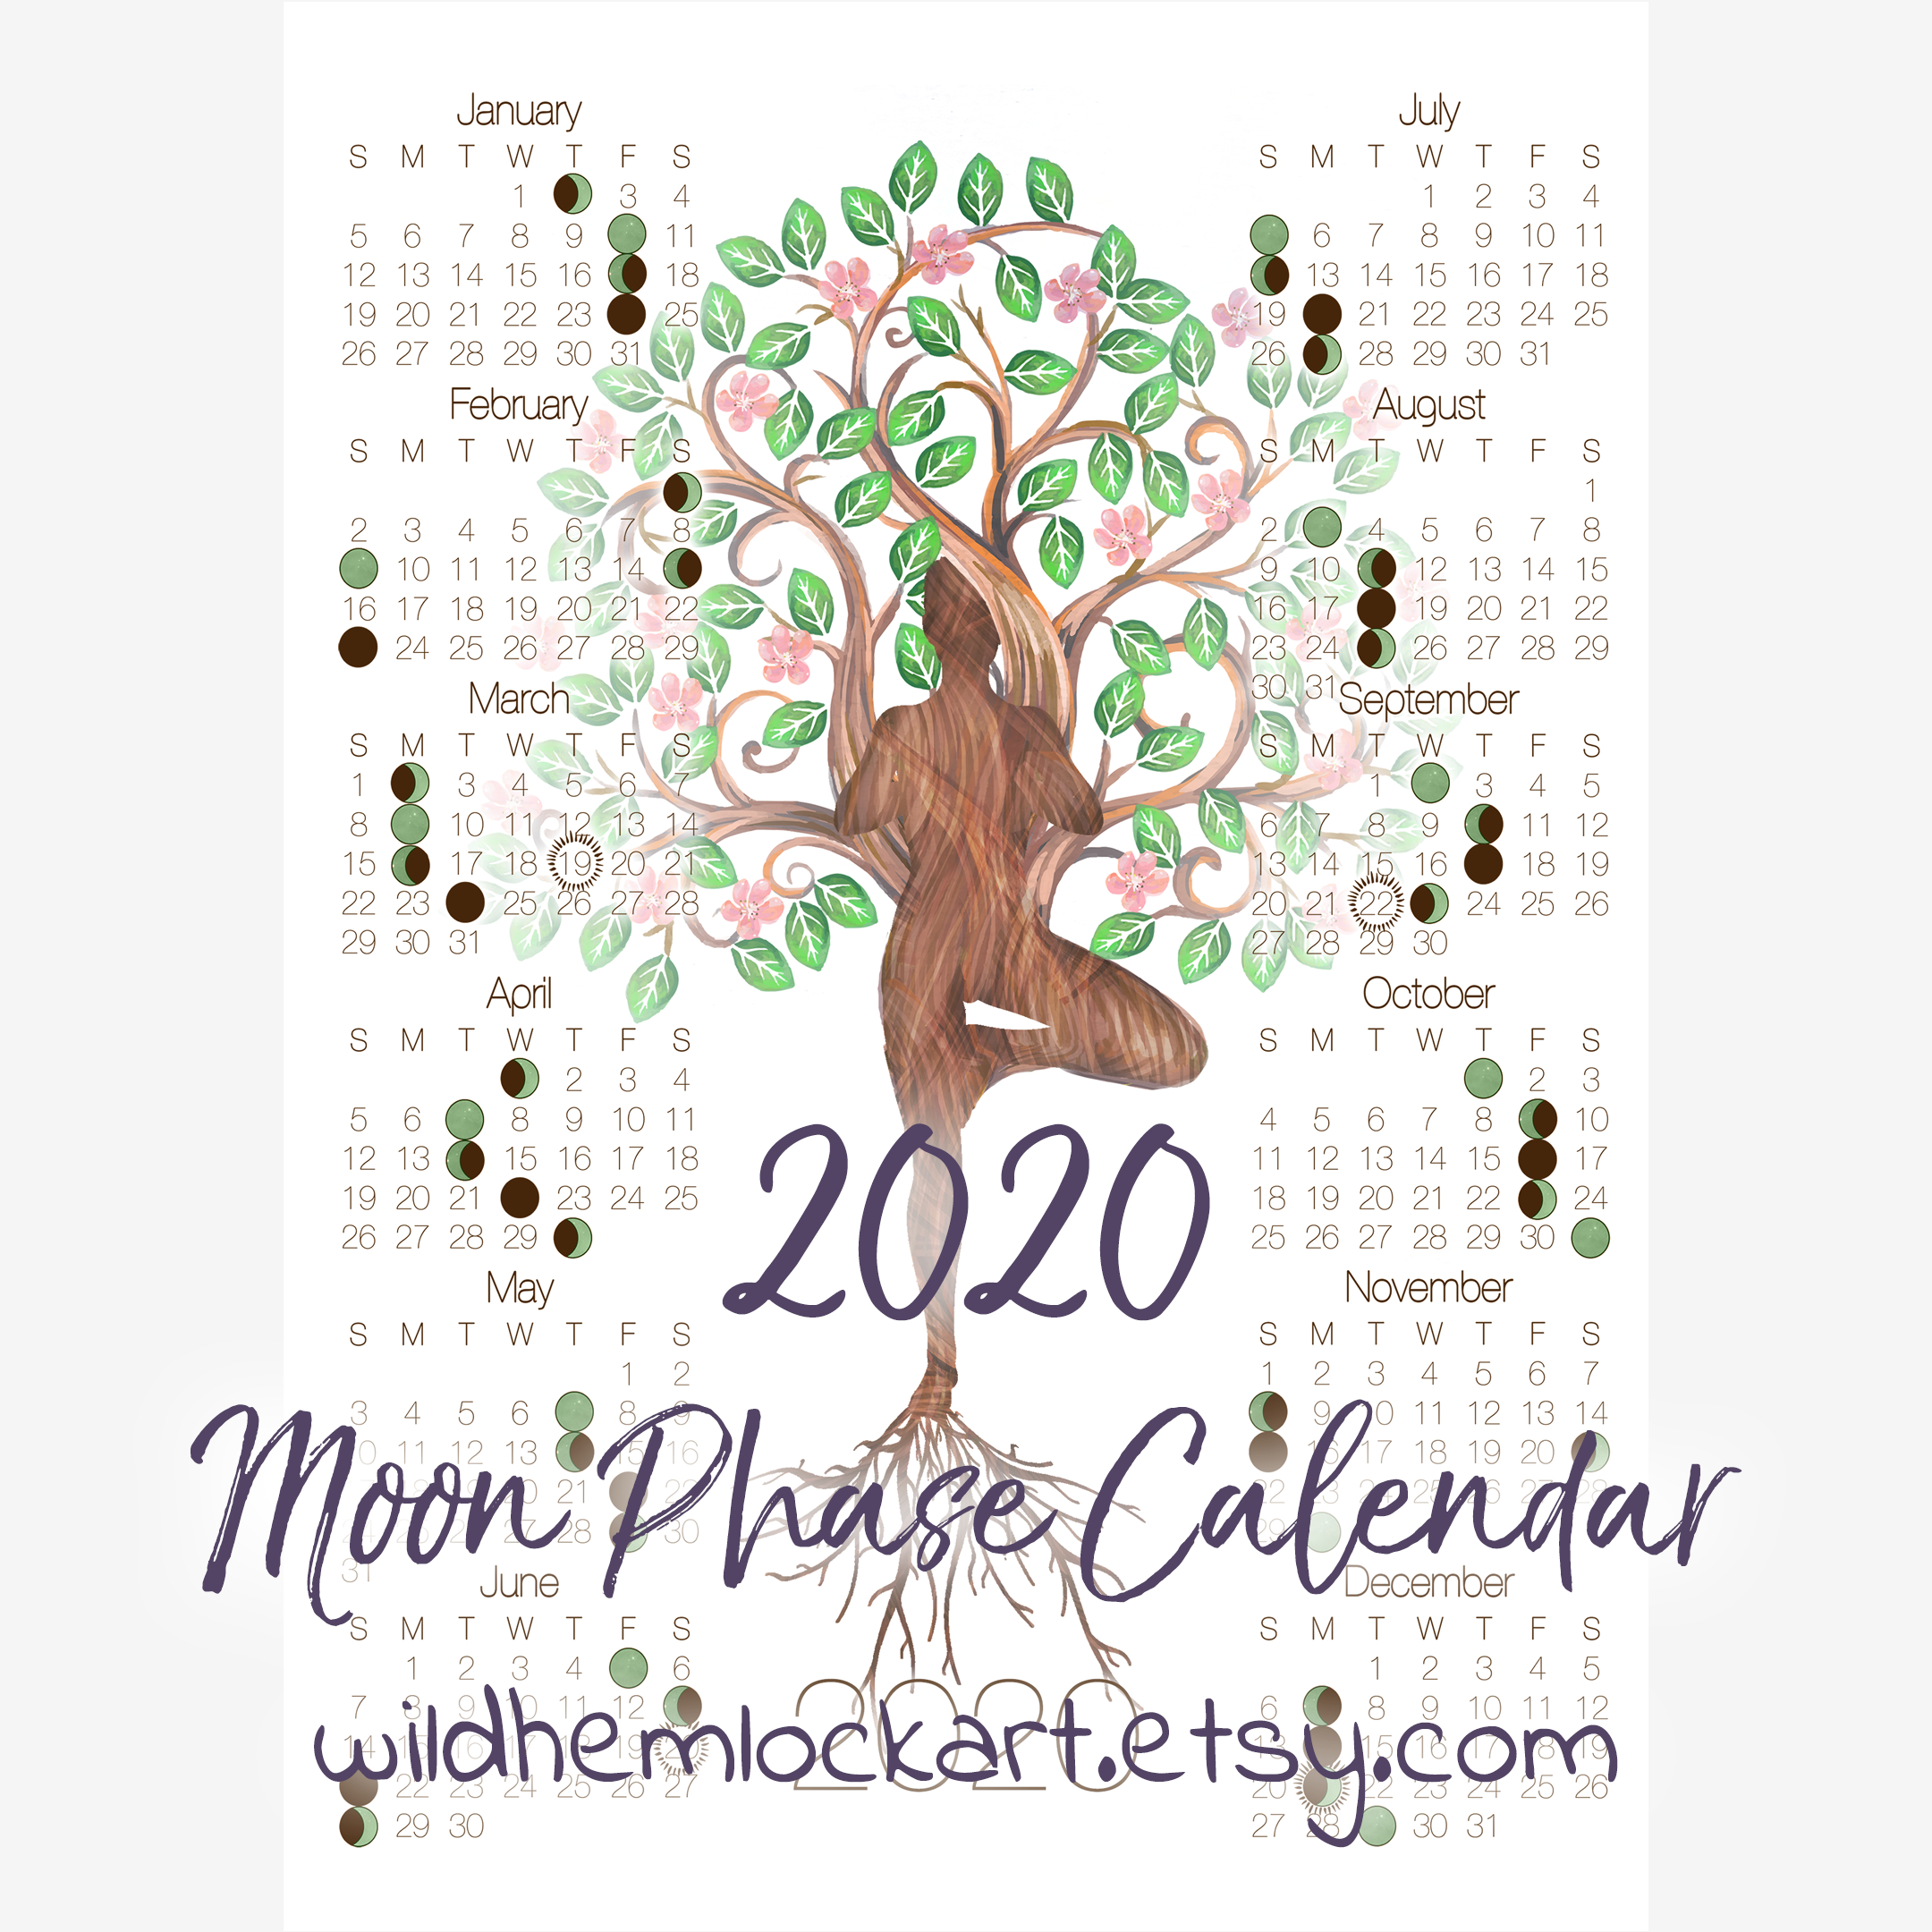 2020 Moon Phase Calendar - Lunar Calender With Tree Of Life